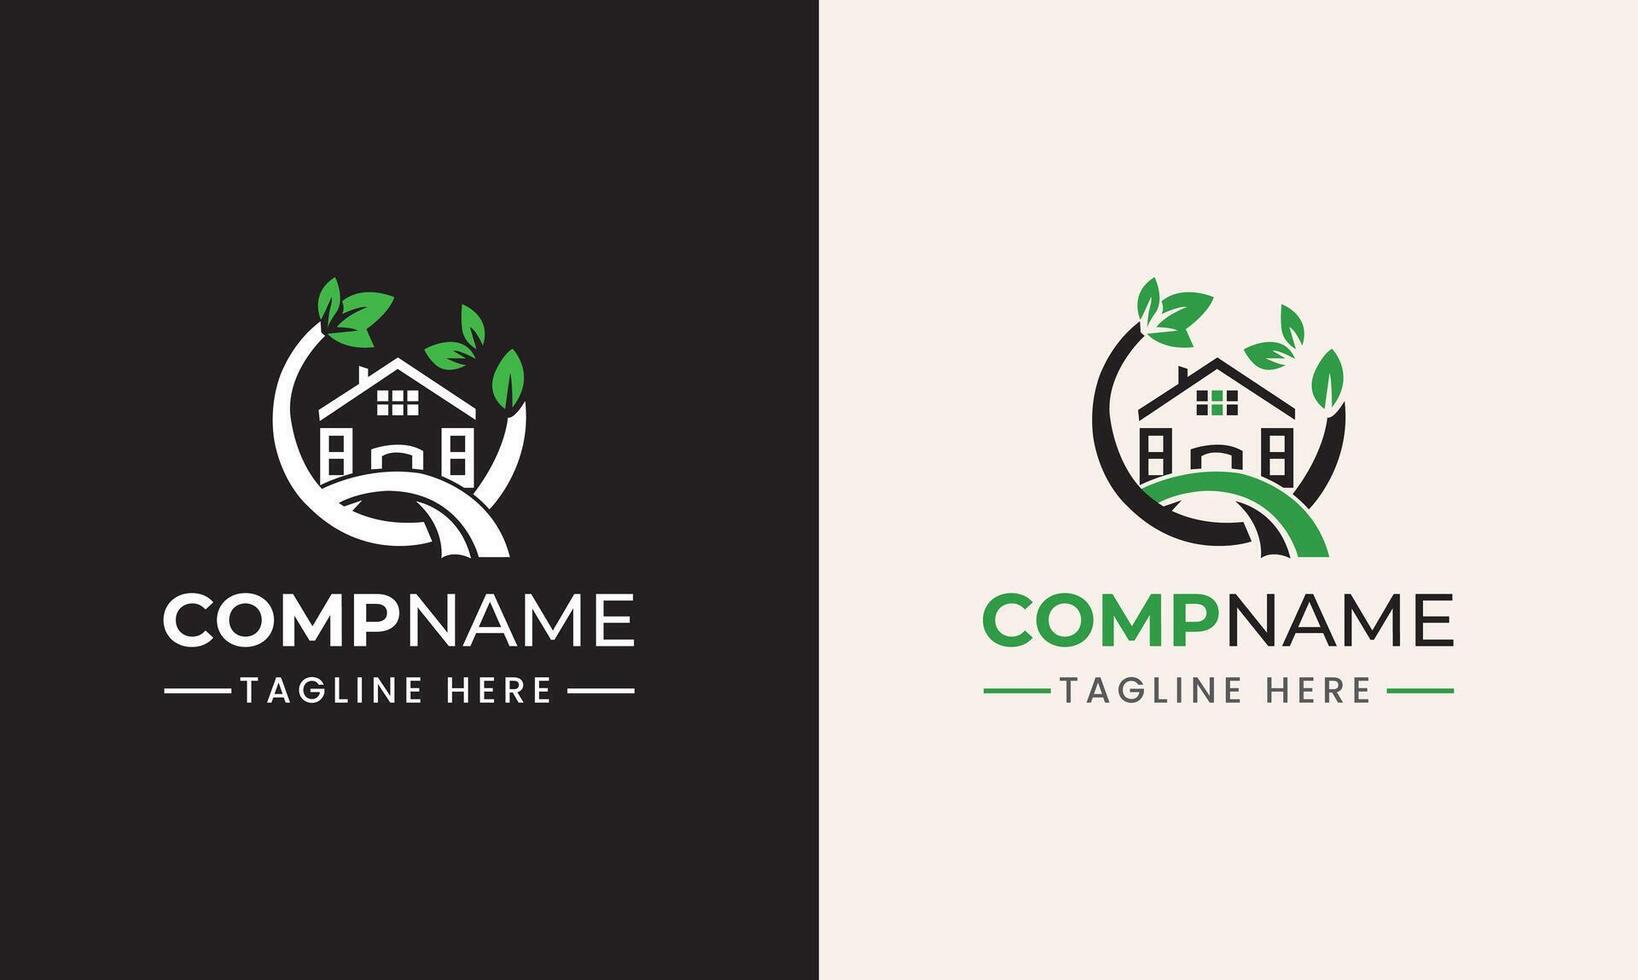 Real-estate icon with leaf, home icon with bird, building logo, icon house illustration symbol idea vector